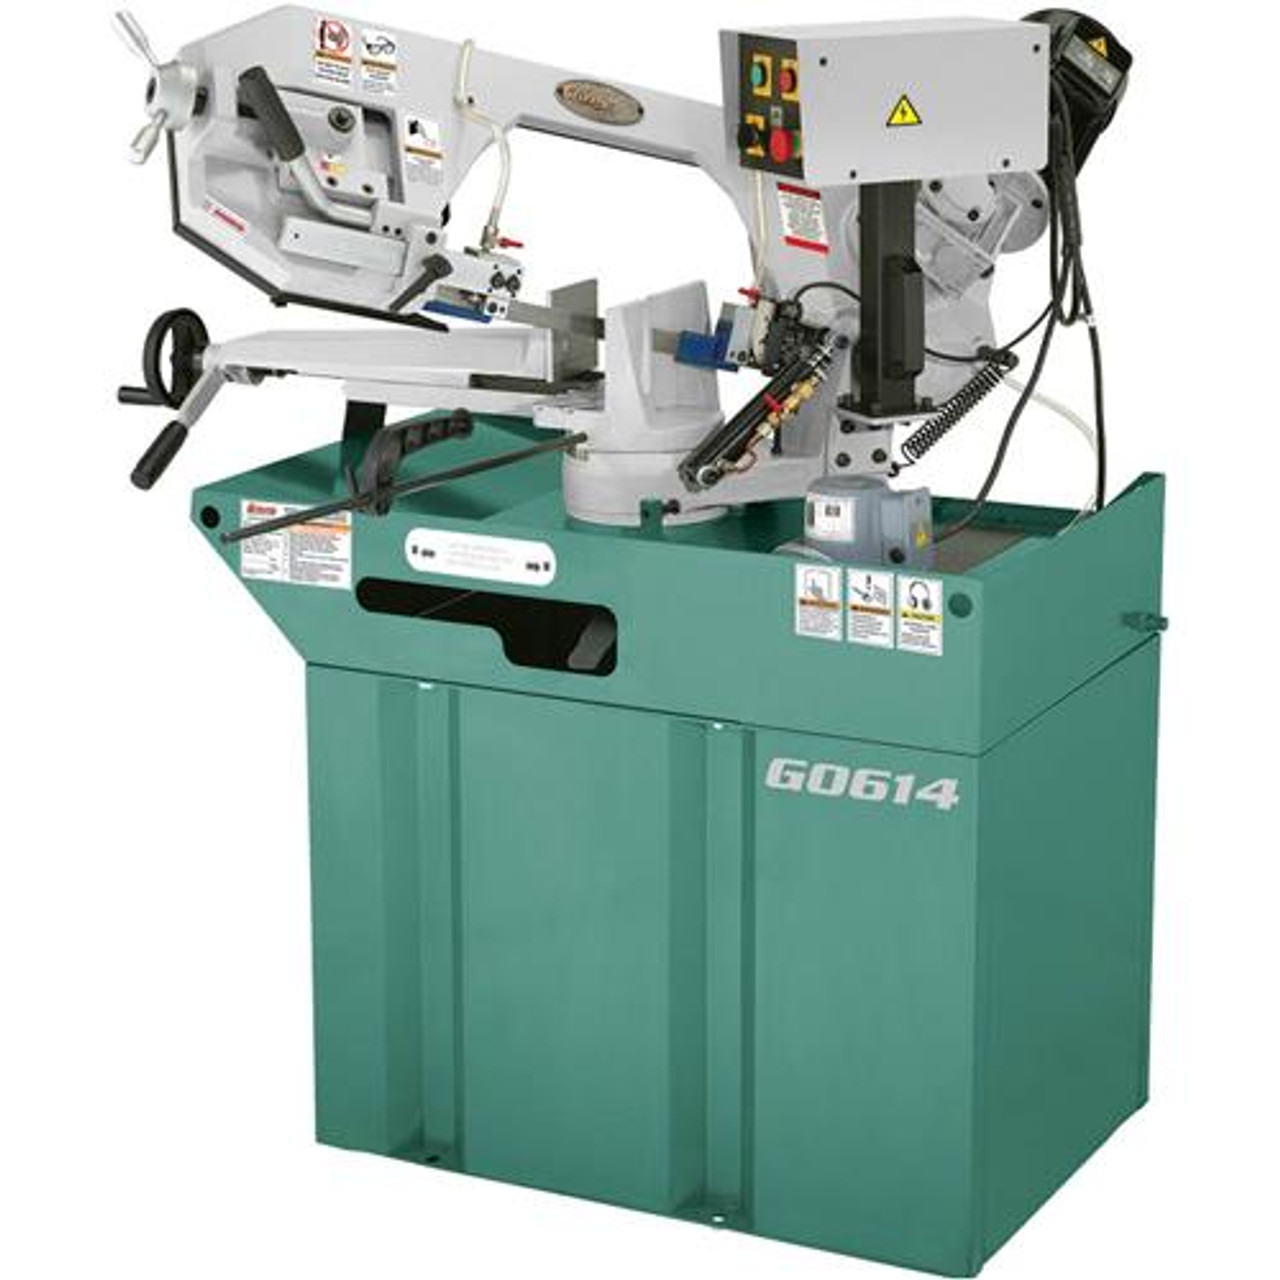 Grizzly Industrial 6” x 9-1/2” 1-1/2 HP Swivel Metal-Cutting Bandsaw G0614  - US Tool Depot